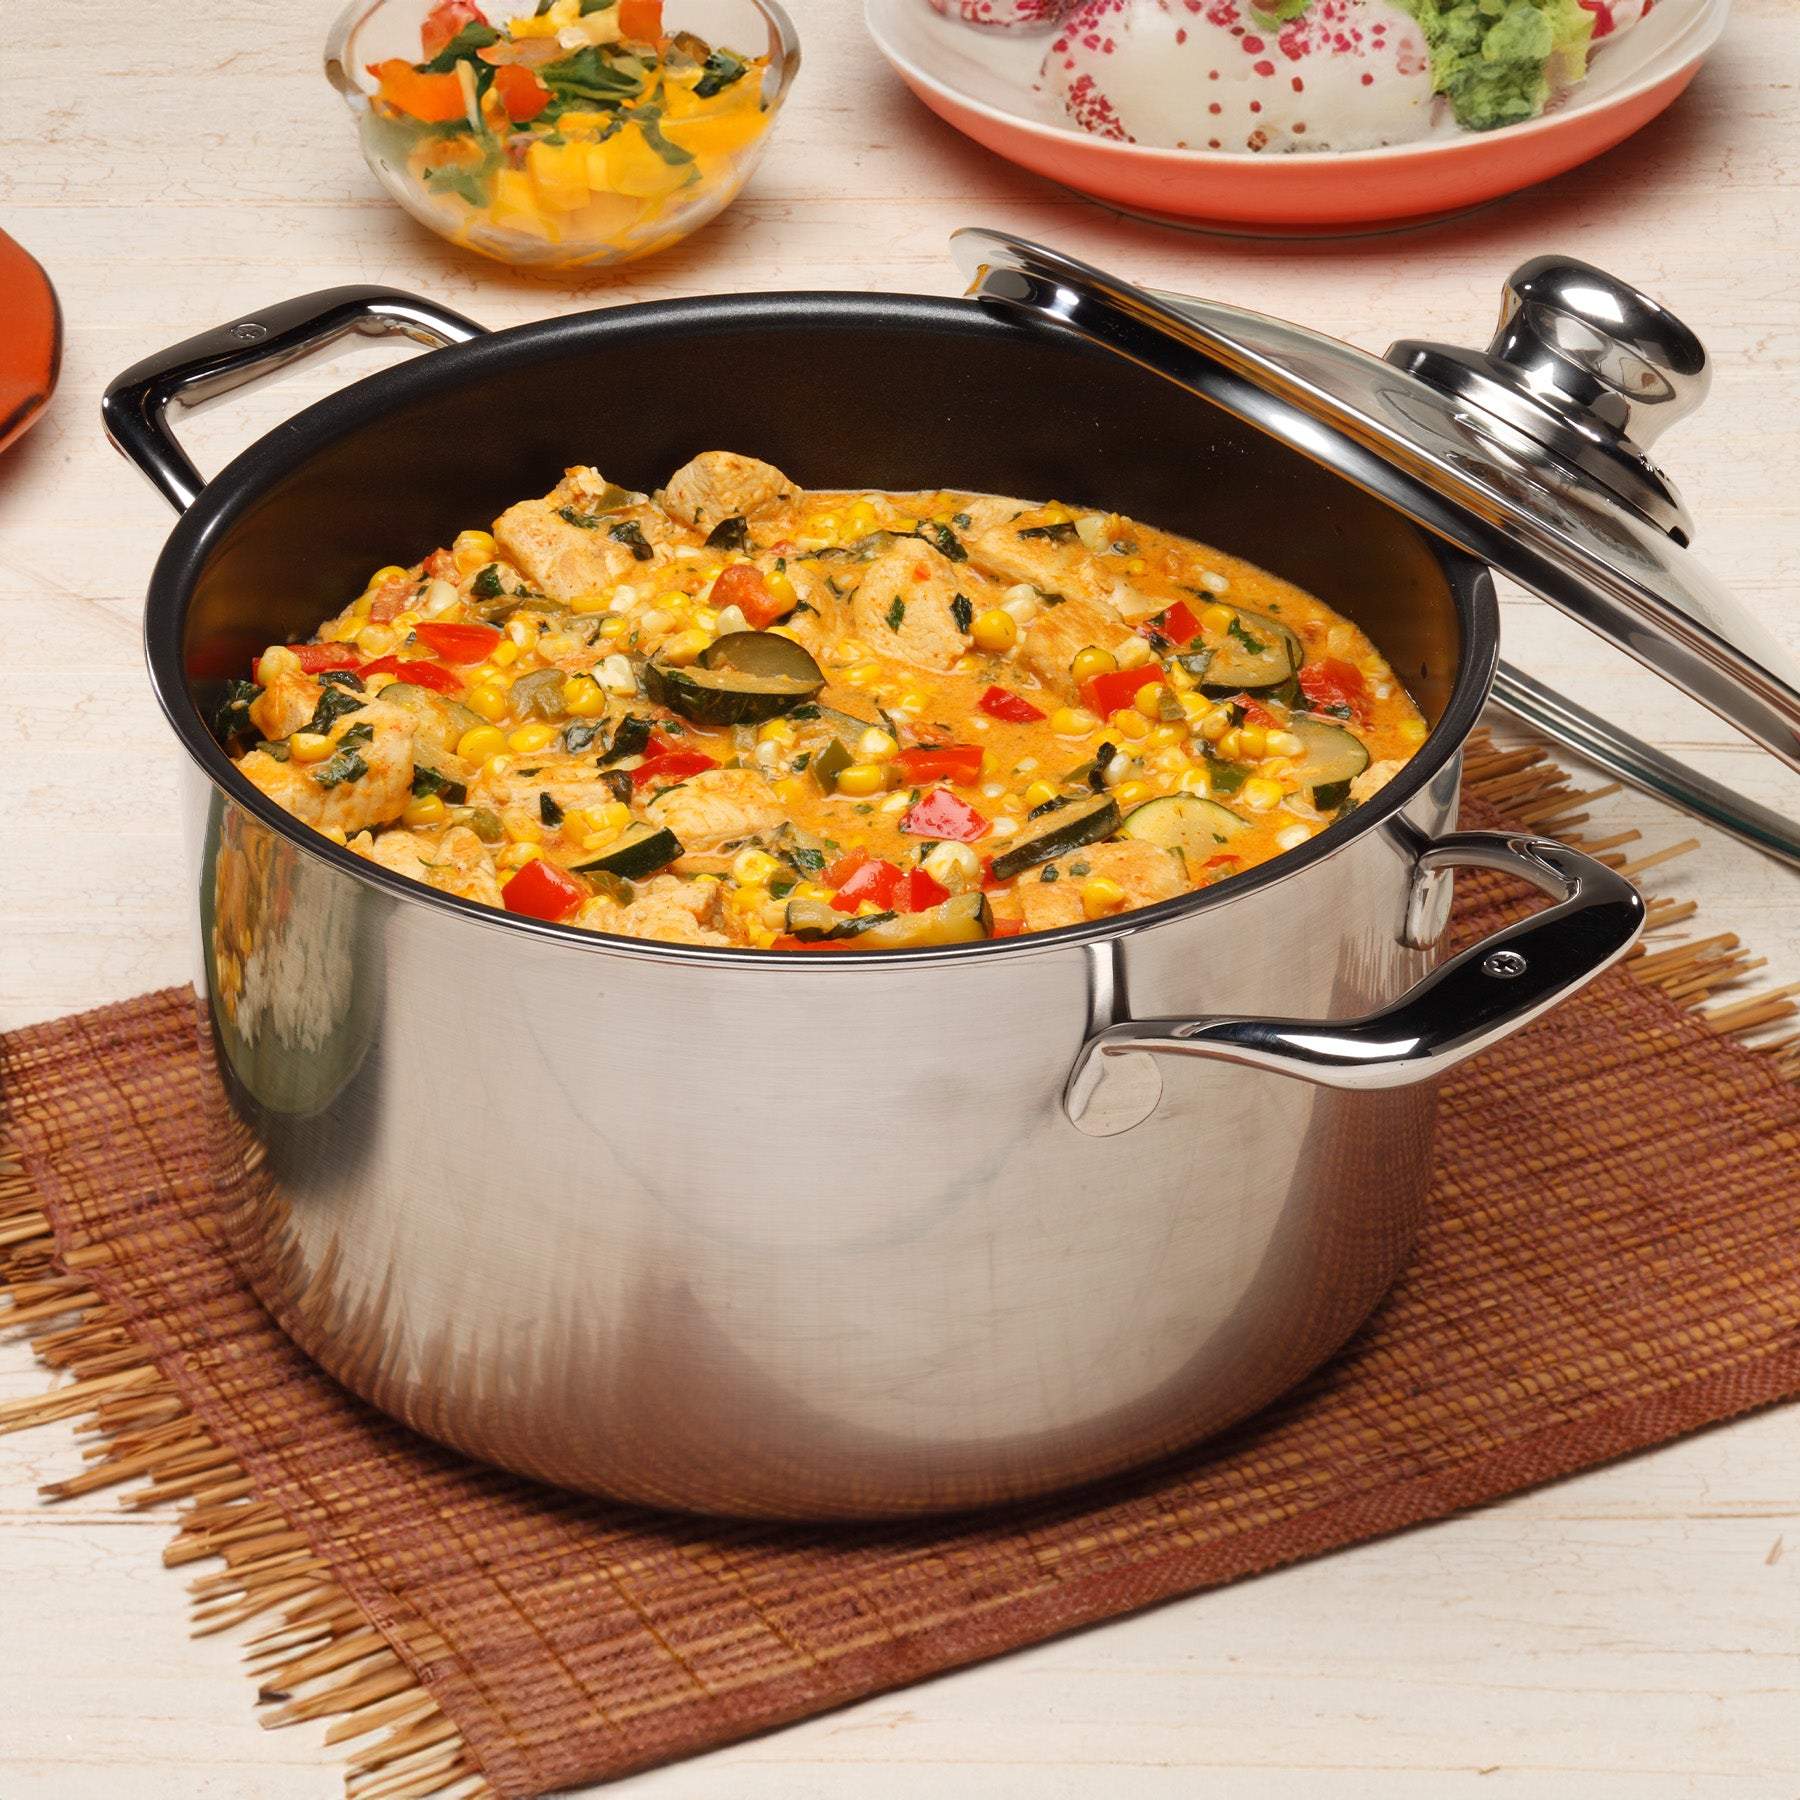 Nonstick Clad 6.3 qt Dutch Oven with Glass Lid - Induction in use on wooden dining room table